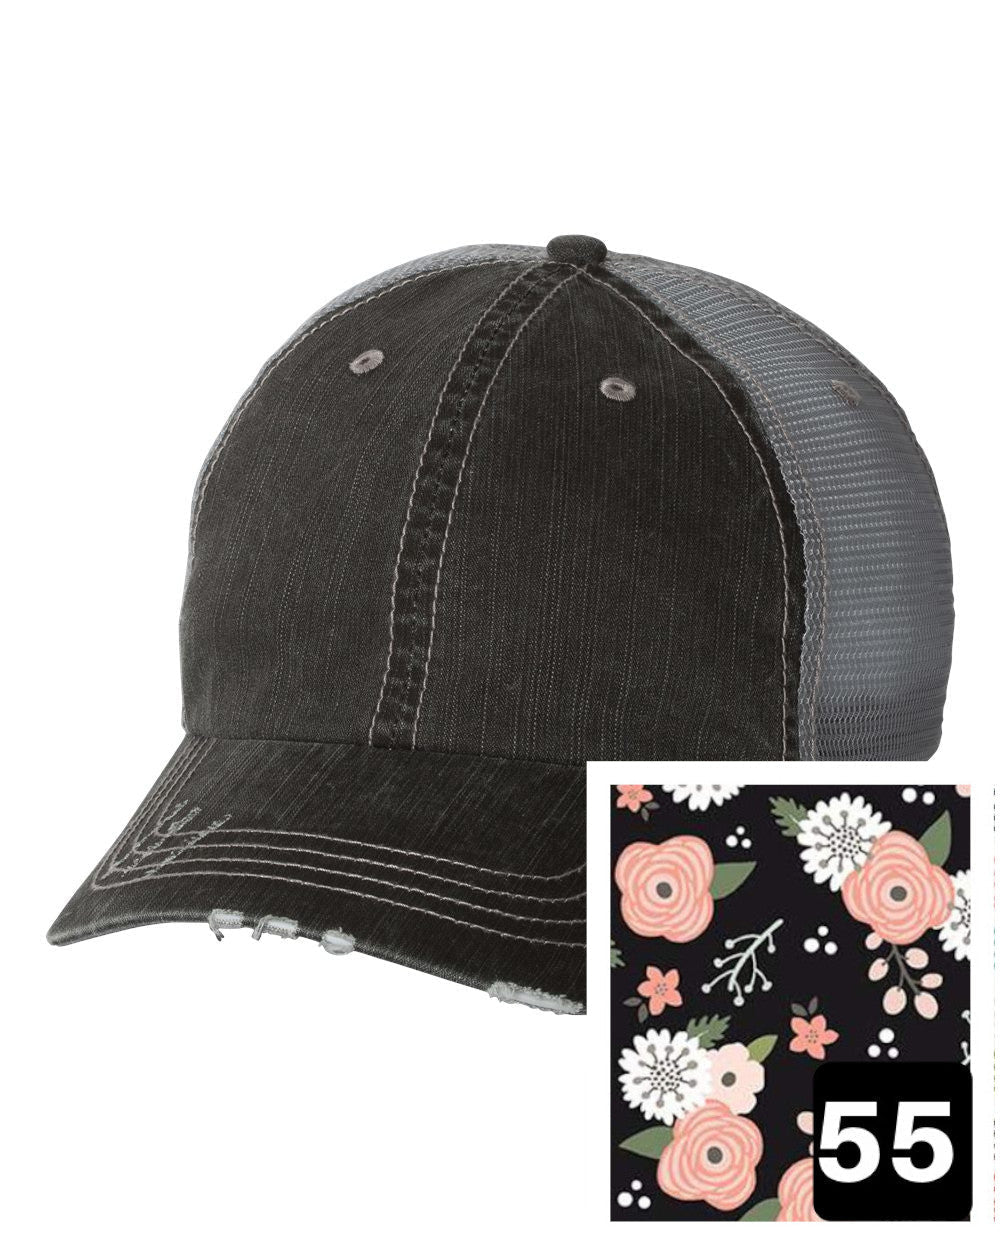 gray distressed trucker hat with petite floral on navy fabric state of Wisconsin